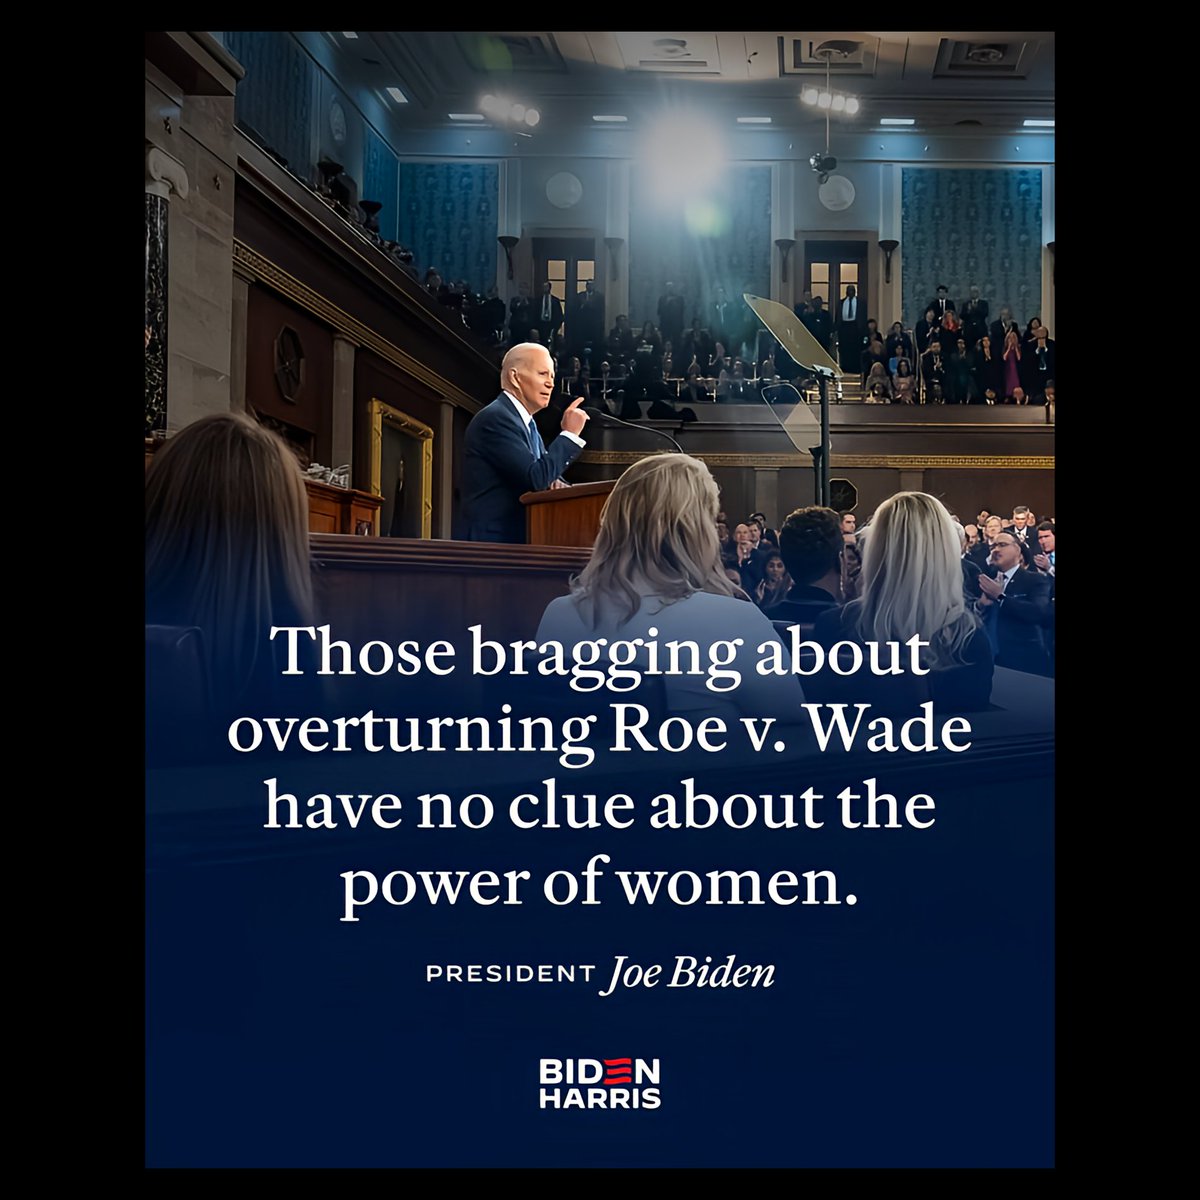 .
'Those bragging about overturning #RoeVwade have no clue about the power of women.'

~ #PresidentJoeBiden